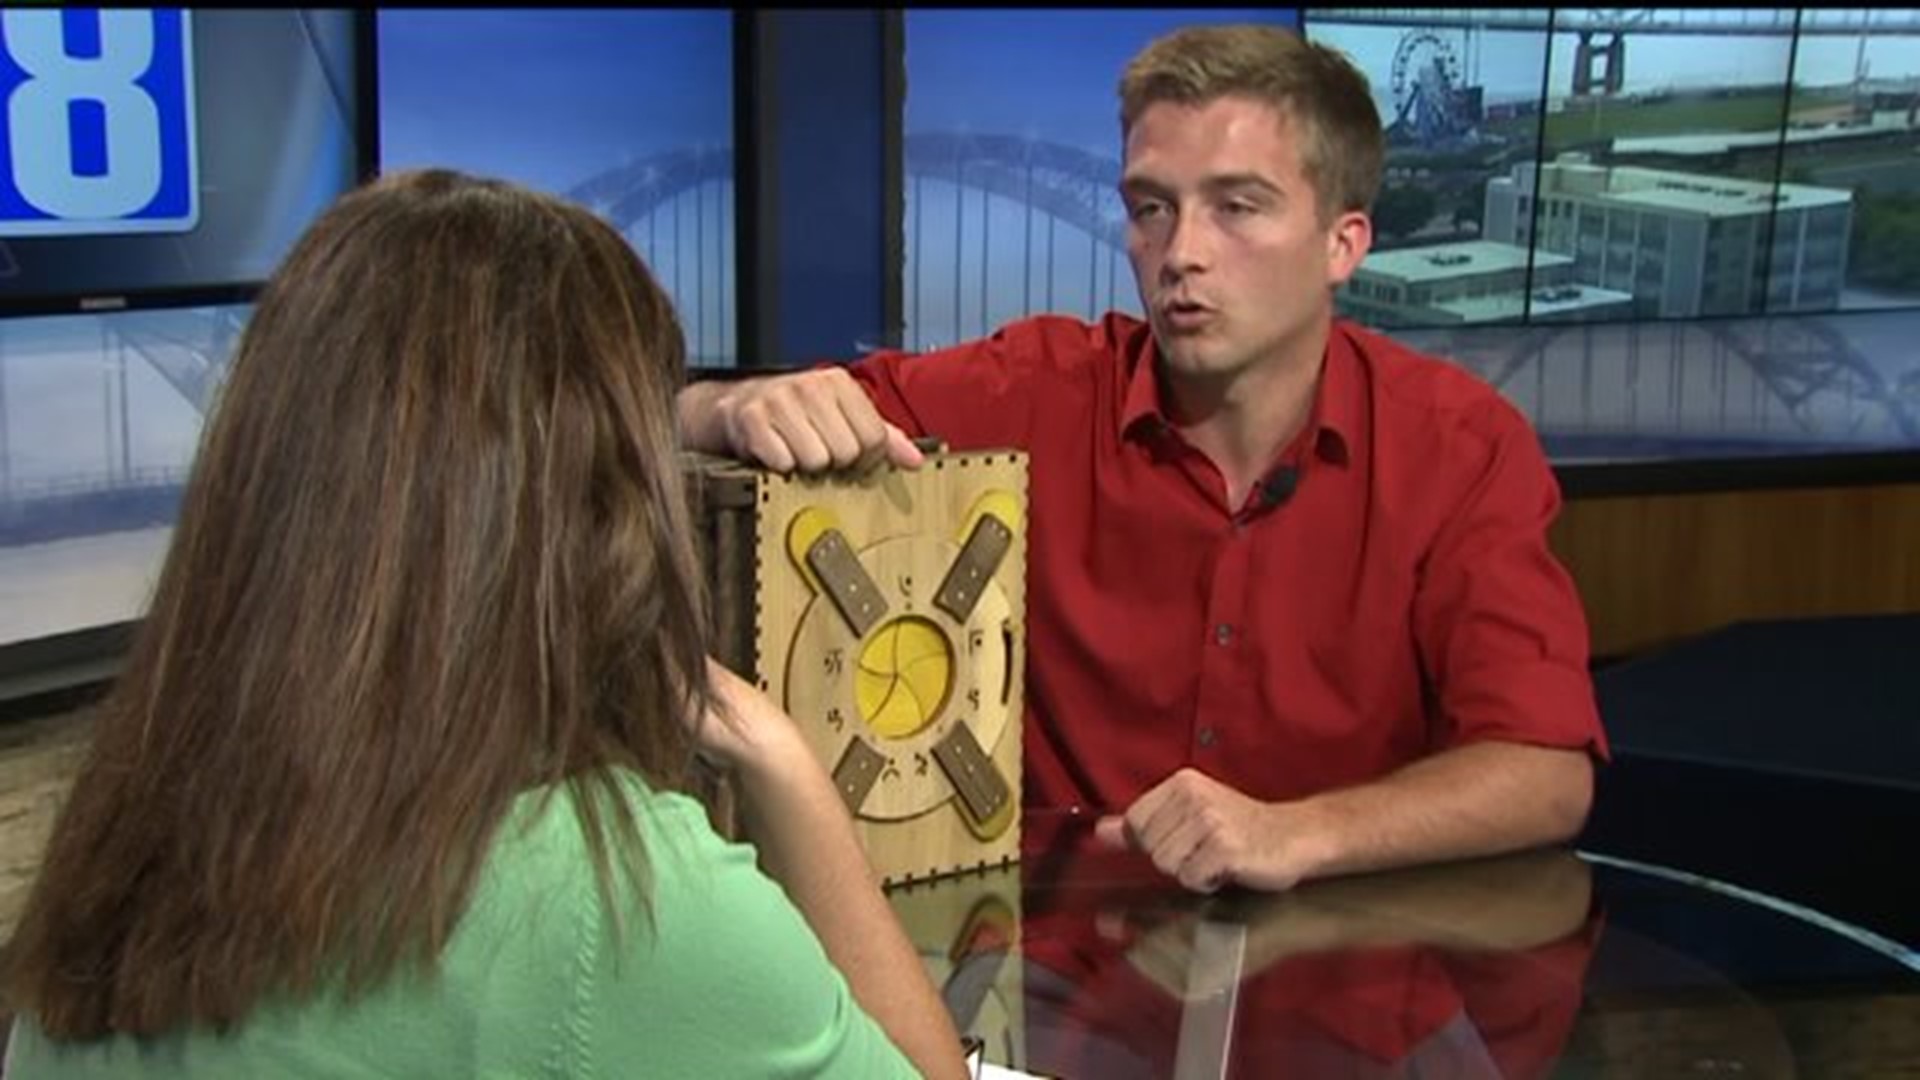 Local Inventor Trying to Turn Idea into Business